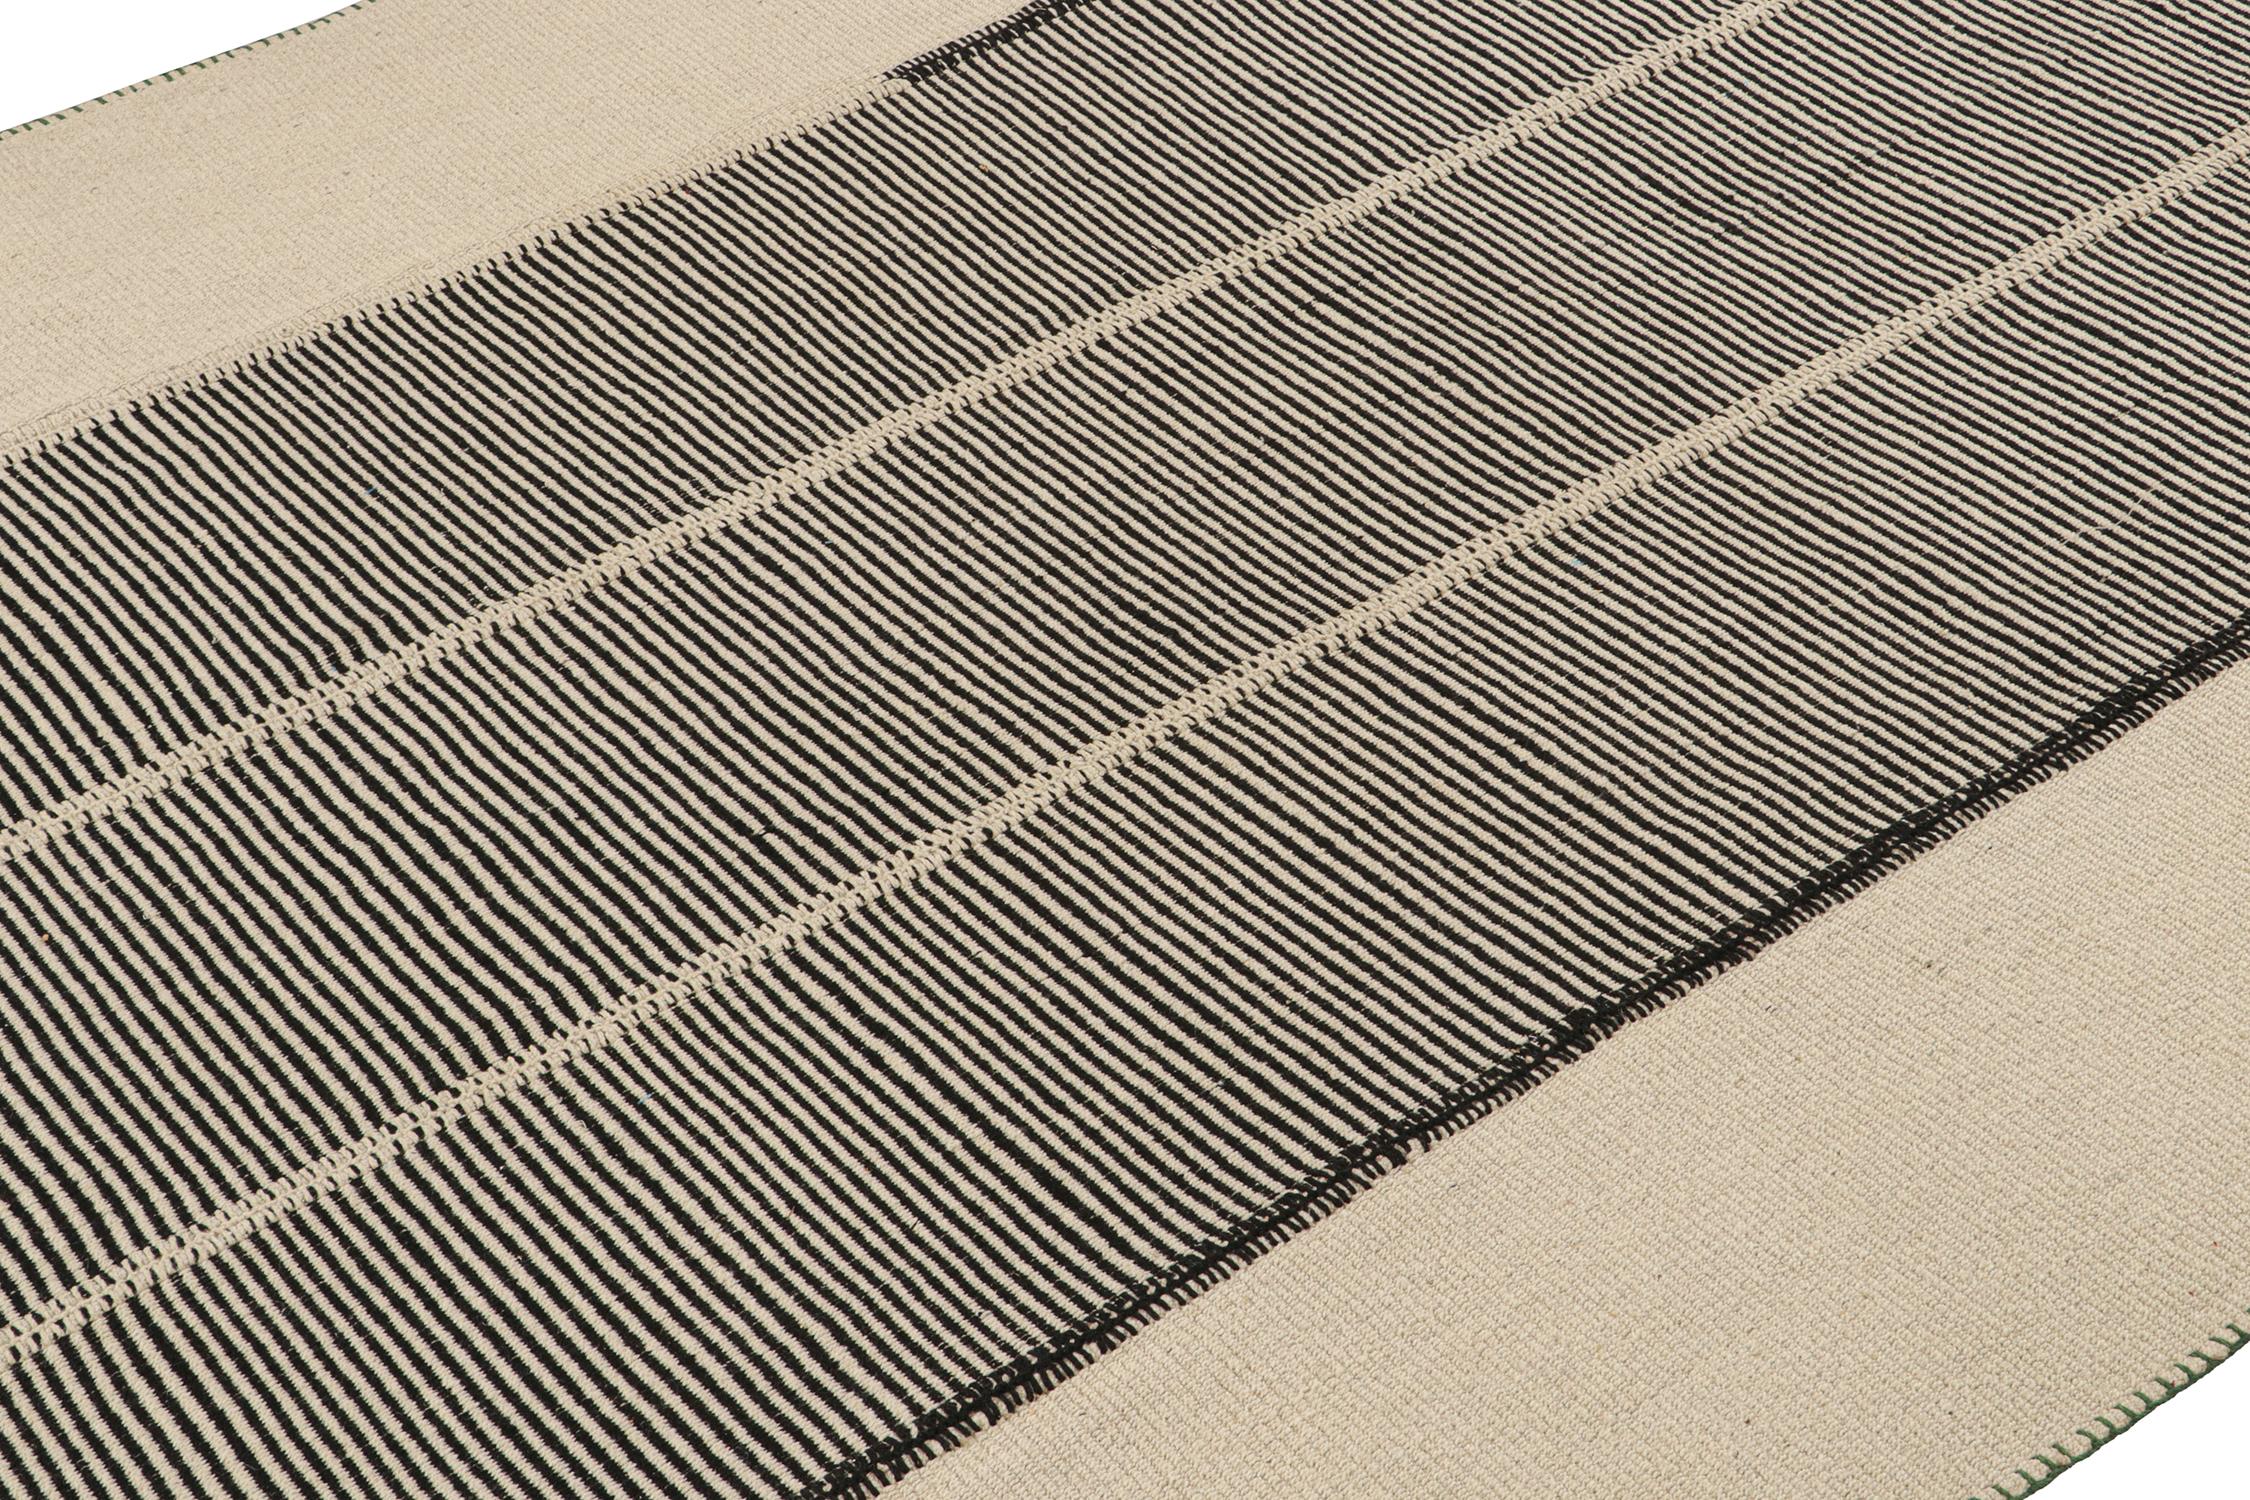 Persian Rug & Kilim’s Custom Kilim Design with Beige-Brown, Black and Off-White Stripes For Sale